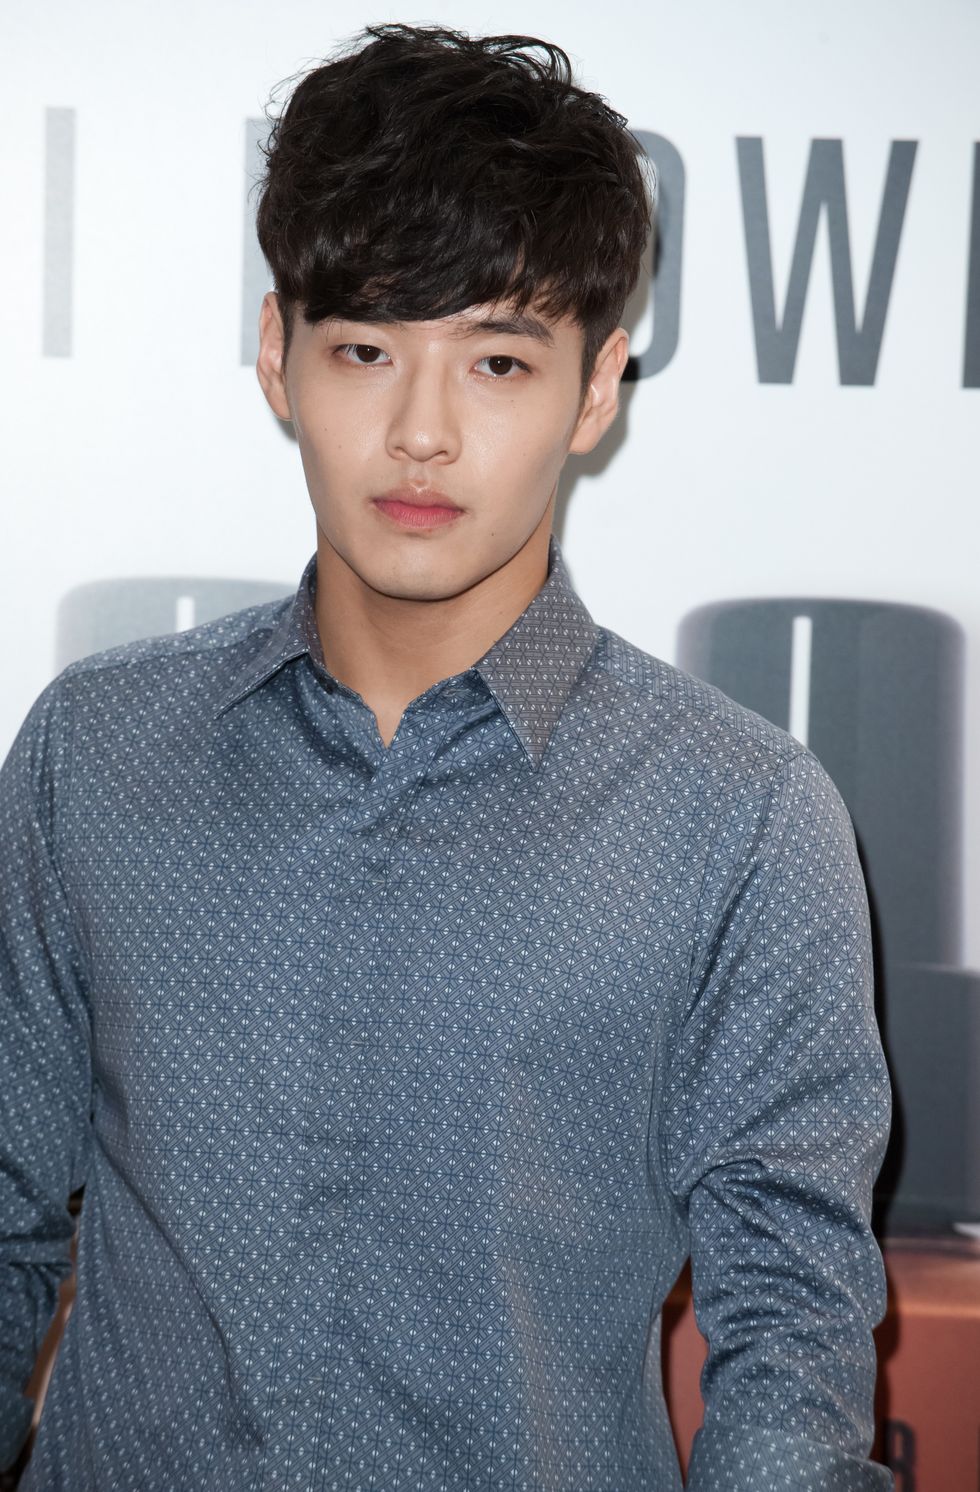 seoul, south korea   august 02  kang ha neul attends the 'bobbi brown' foundation launching event on august 2, 2013 in seoul, south korea  photo by choi soo youngmulti bits via getty images